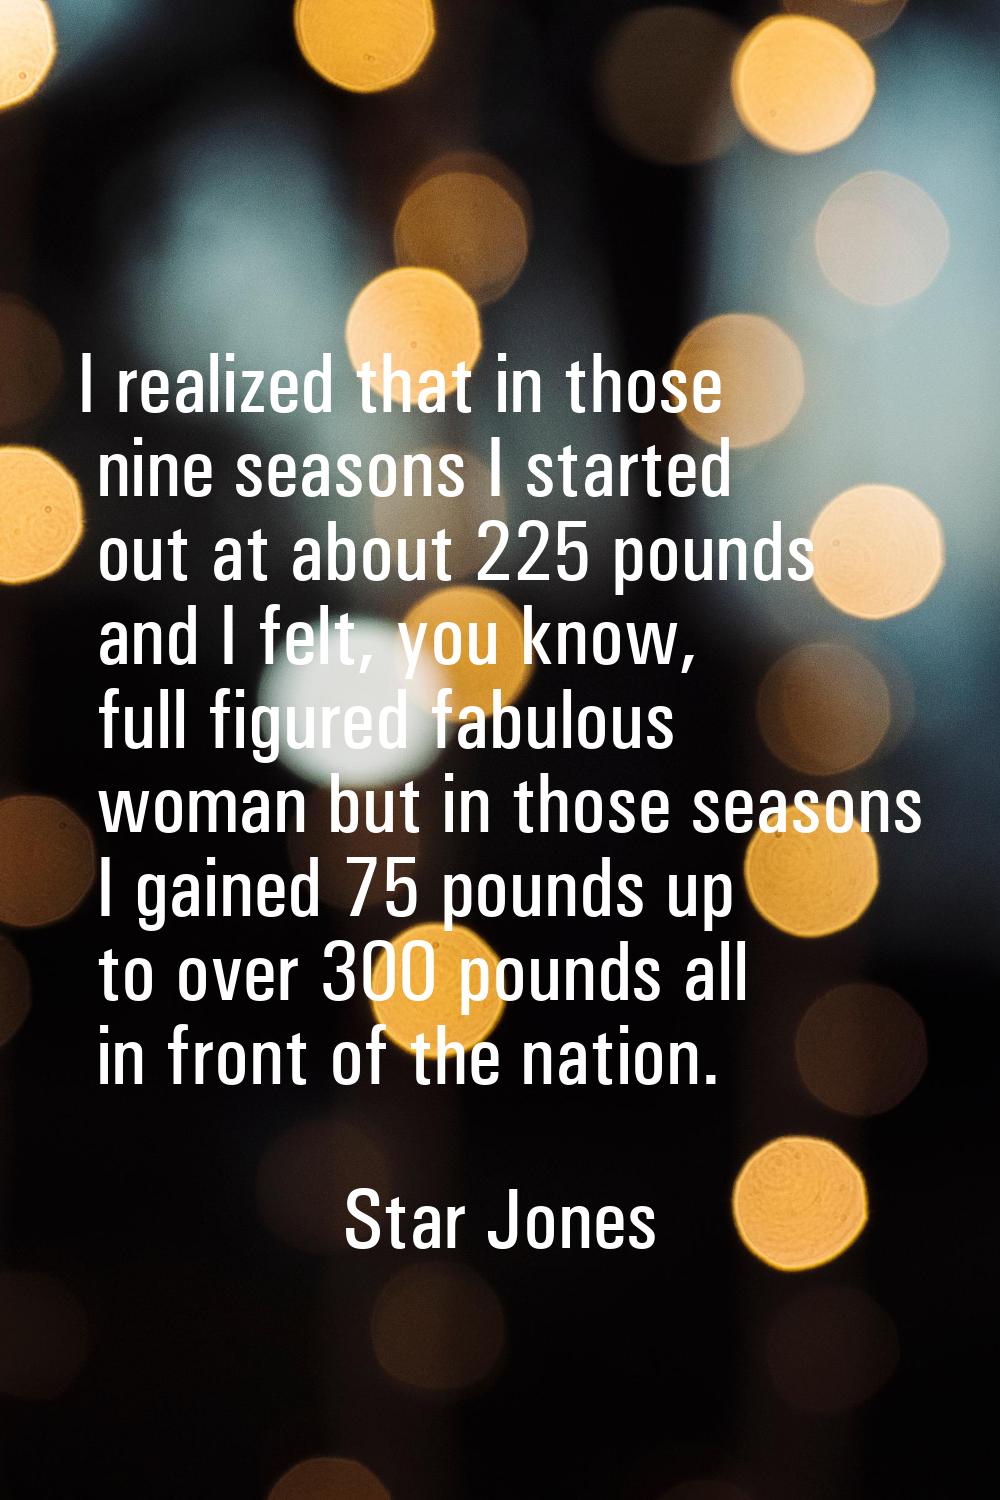 I realized that in those nine seasons I started out at about 225 pounds and I felt, you know, full 